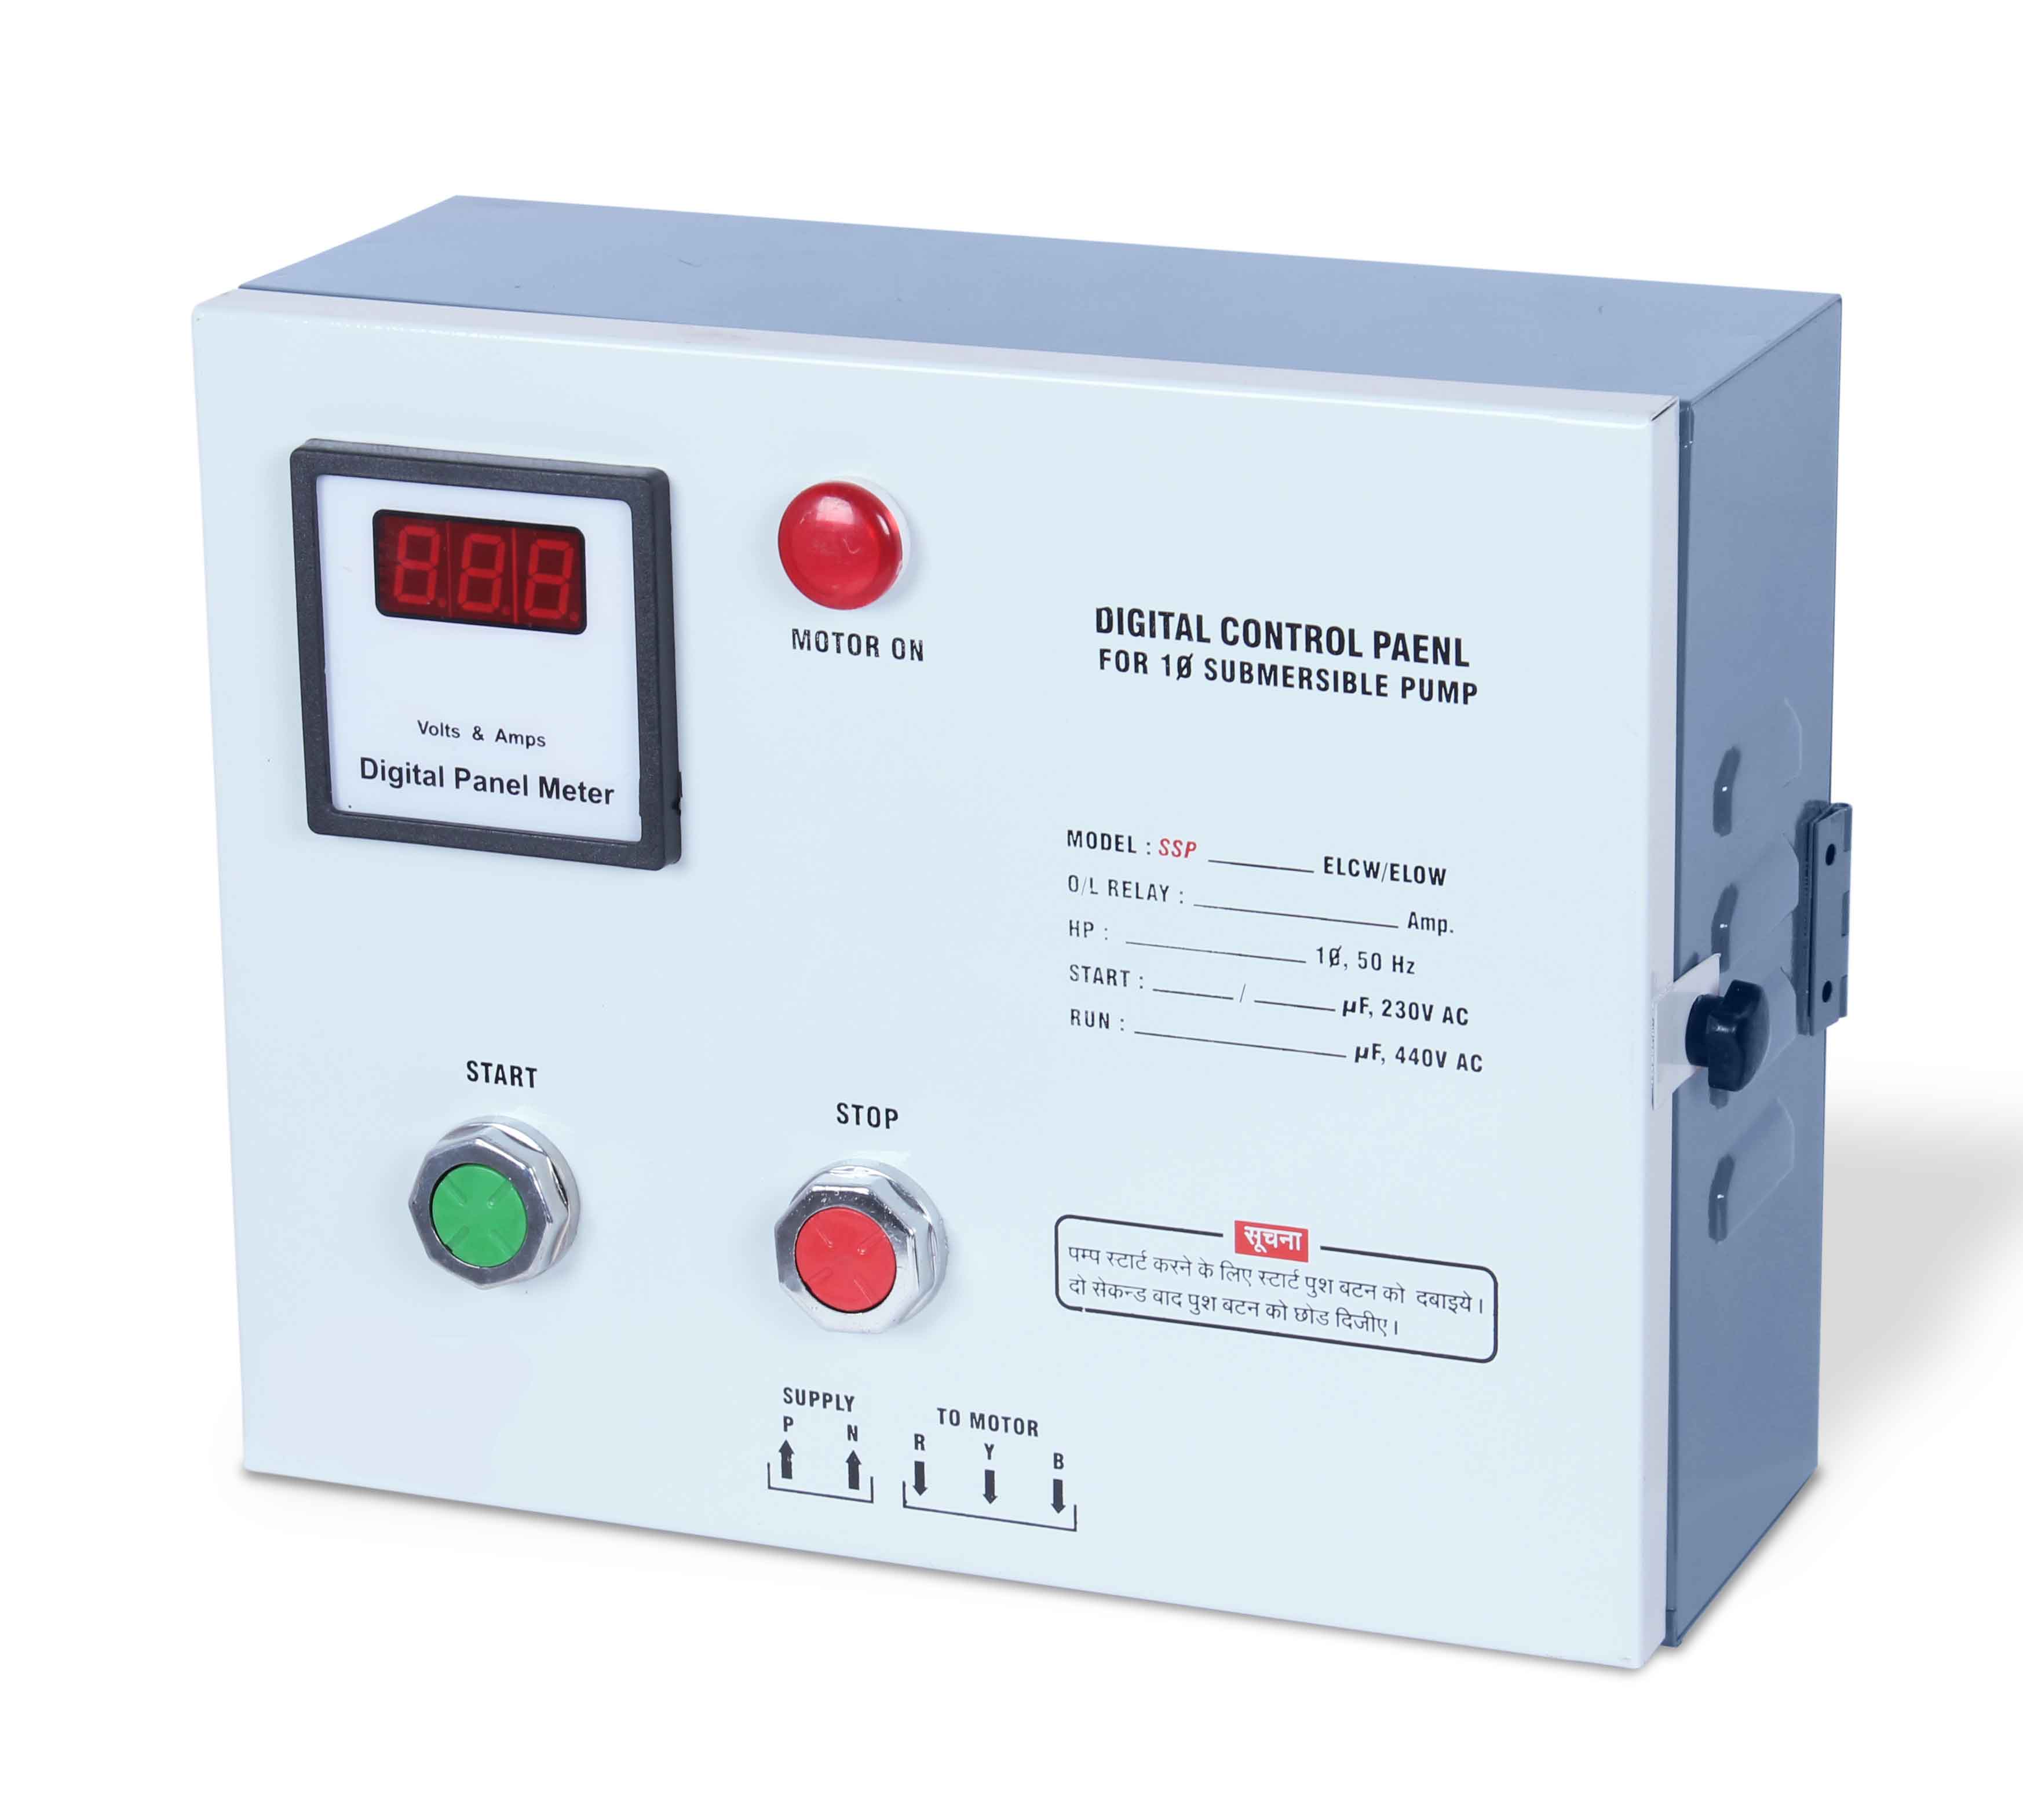 ELCW DIGI Single phase digital motor starter suitable up to 1.5 HP submersible motor with overload protections by bi metallic relay